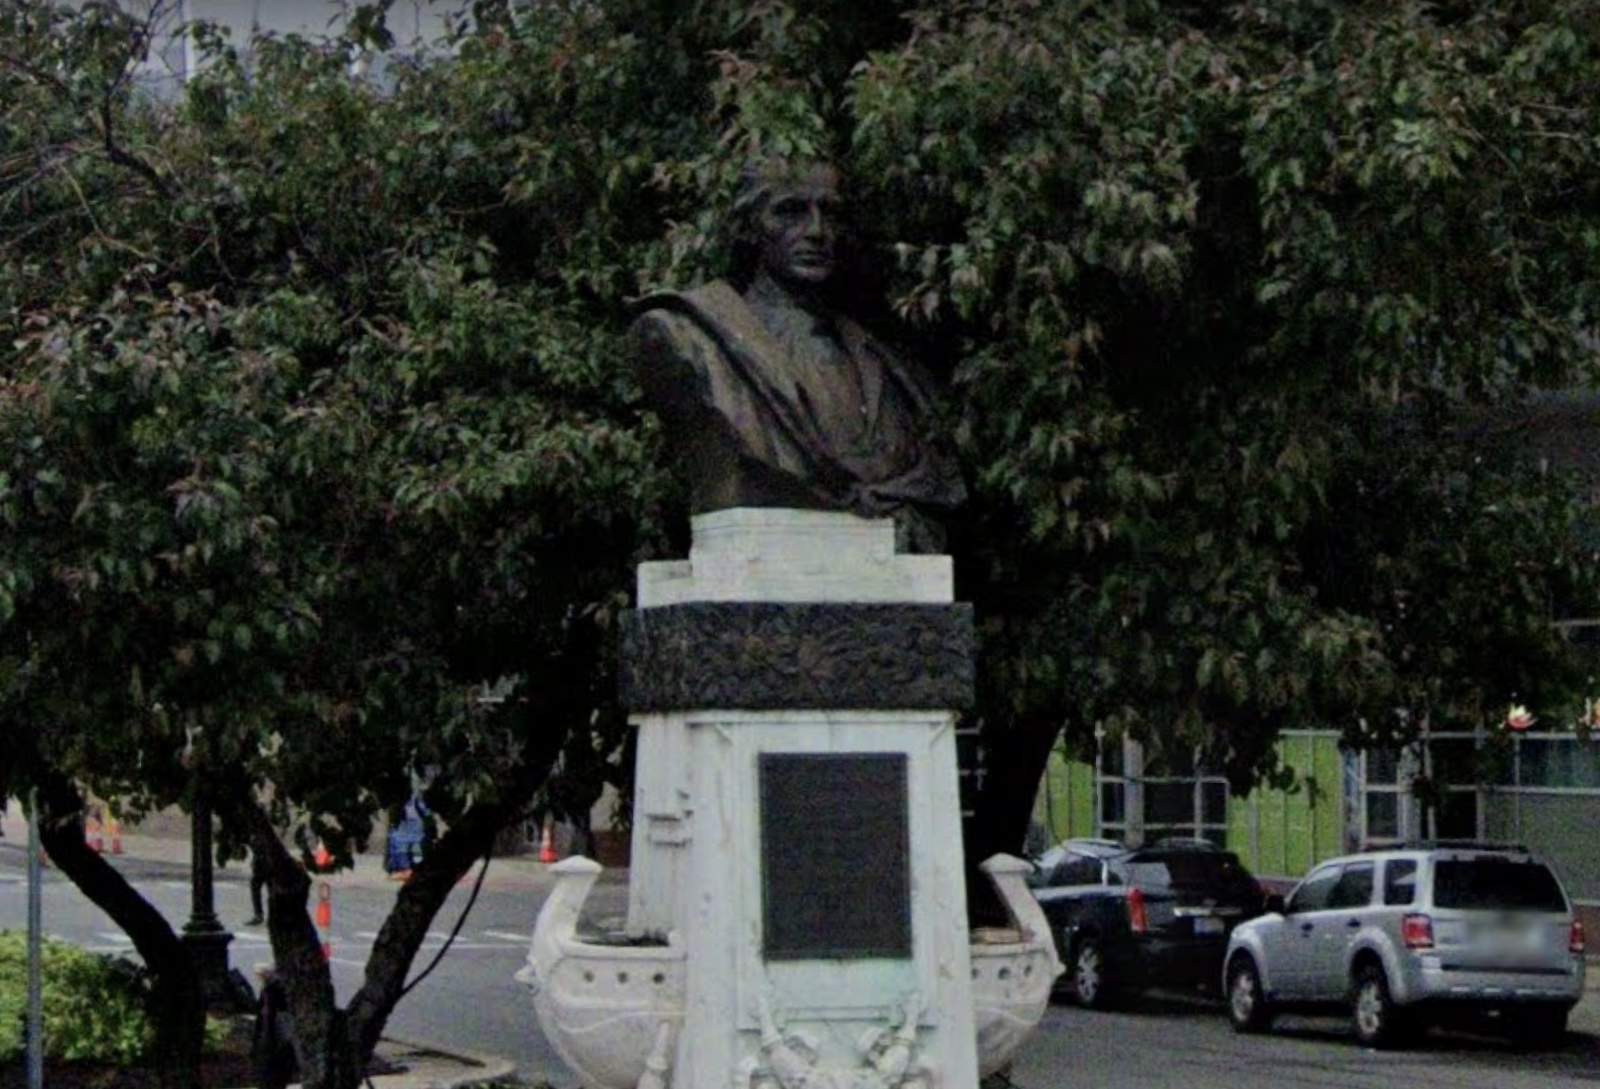 Detroit mayor orders removal of Christopher Columbus bust